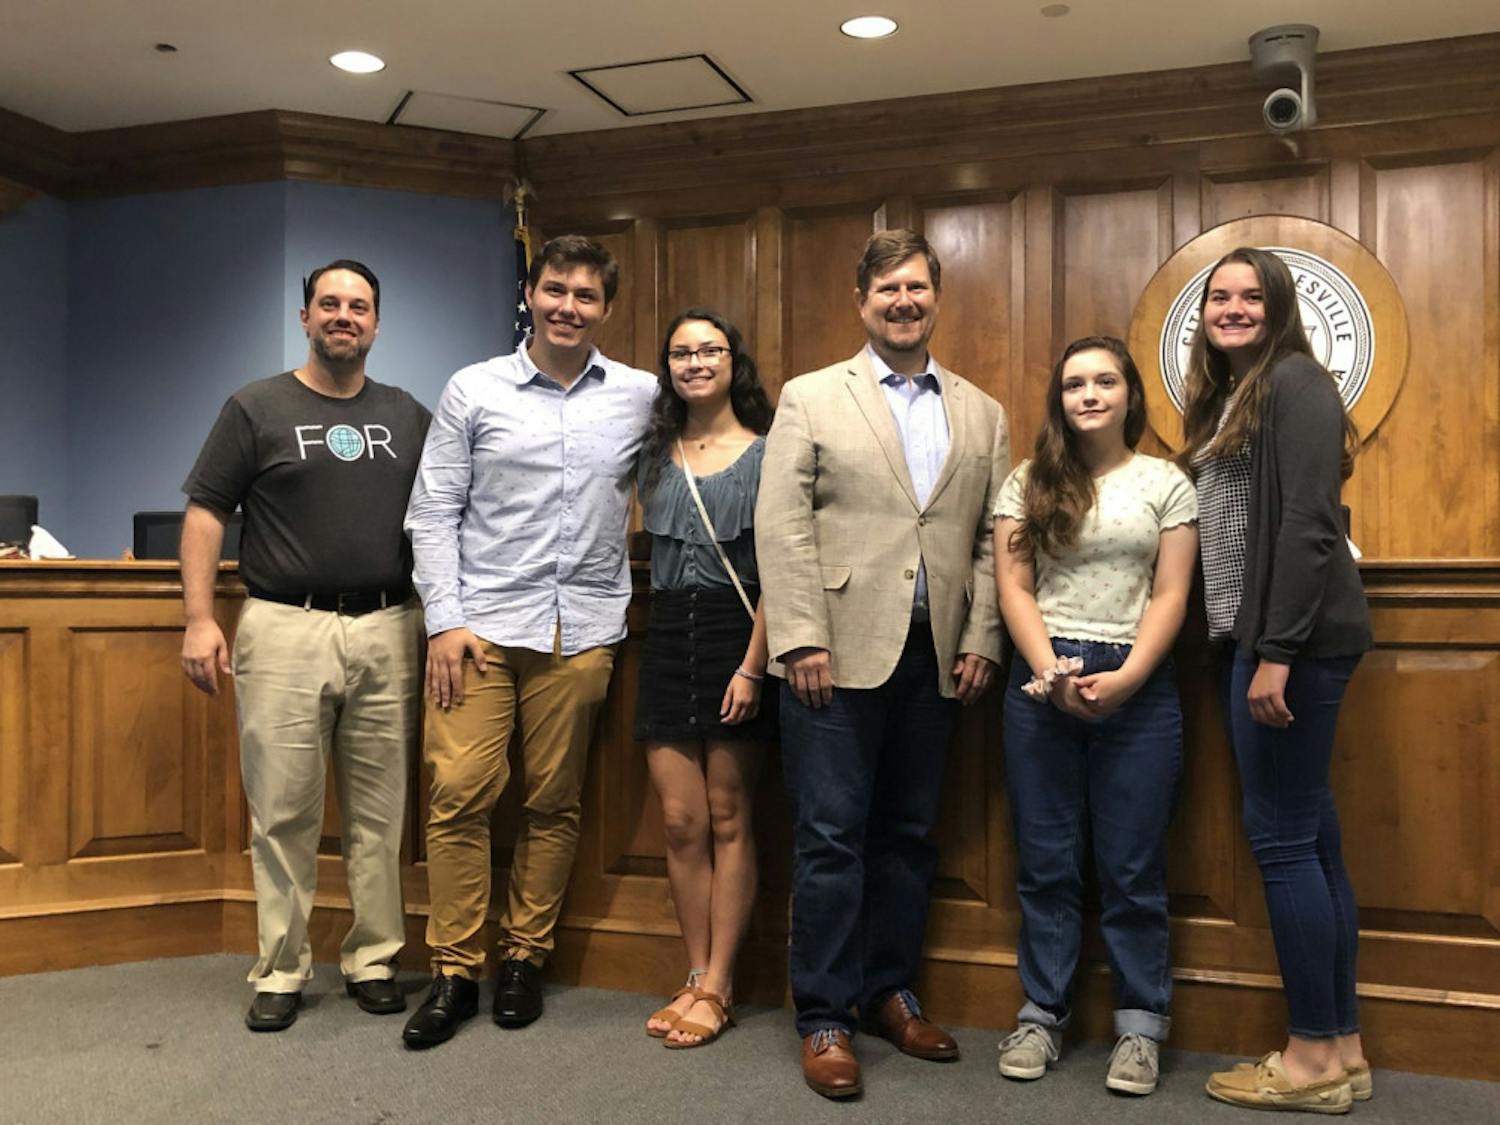 (Left to Right) Joshua Forgione, Matt Mann, Bella Wilson, Mayor Lauren Poe, Keelyn Fife and Alissa Humphrey pose for a photo after presenting their projects in the City Commission room.&nbsp;